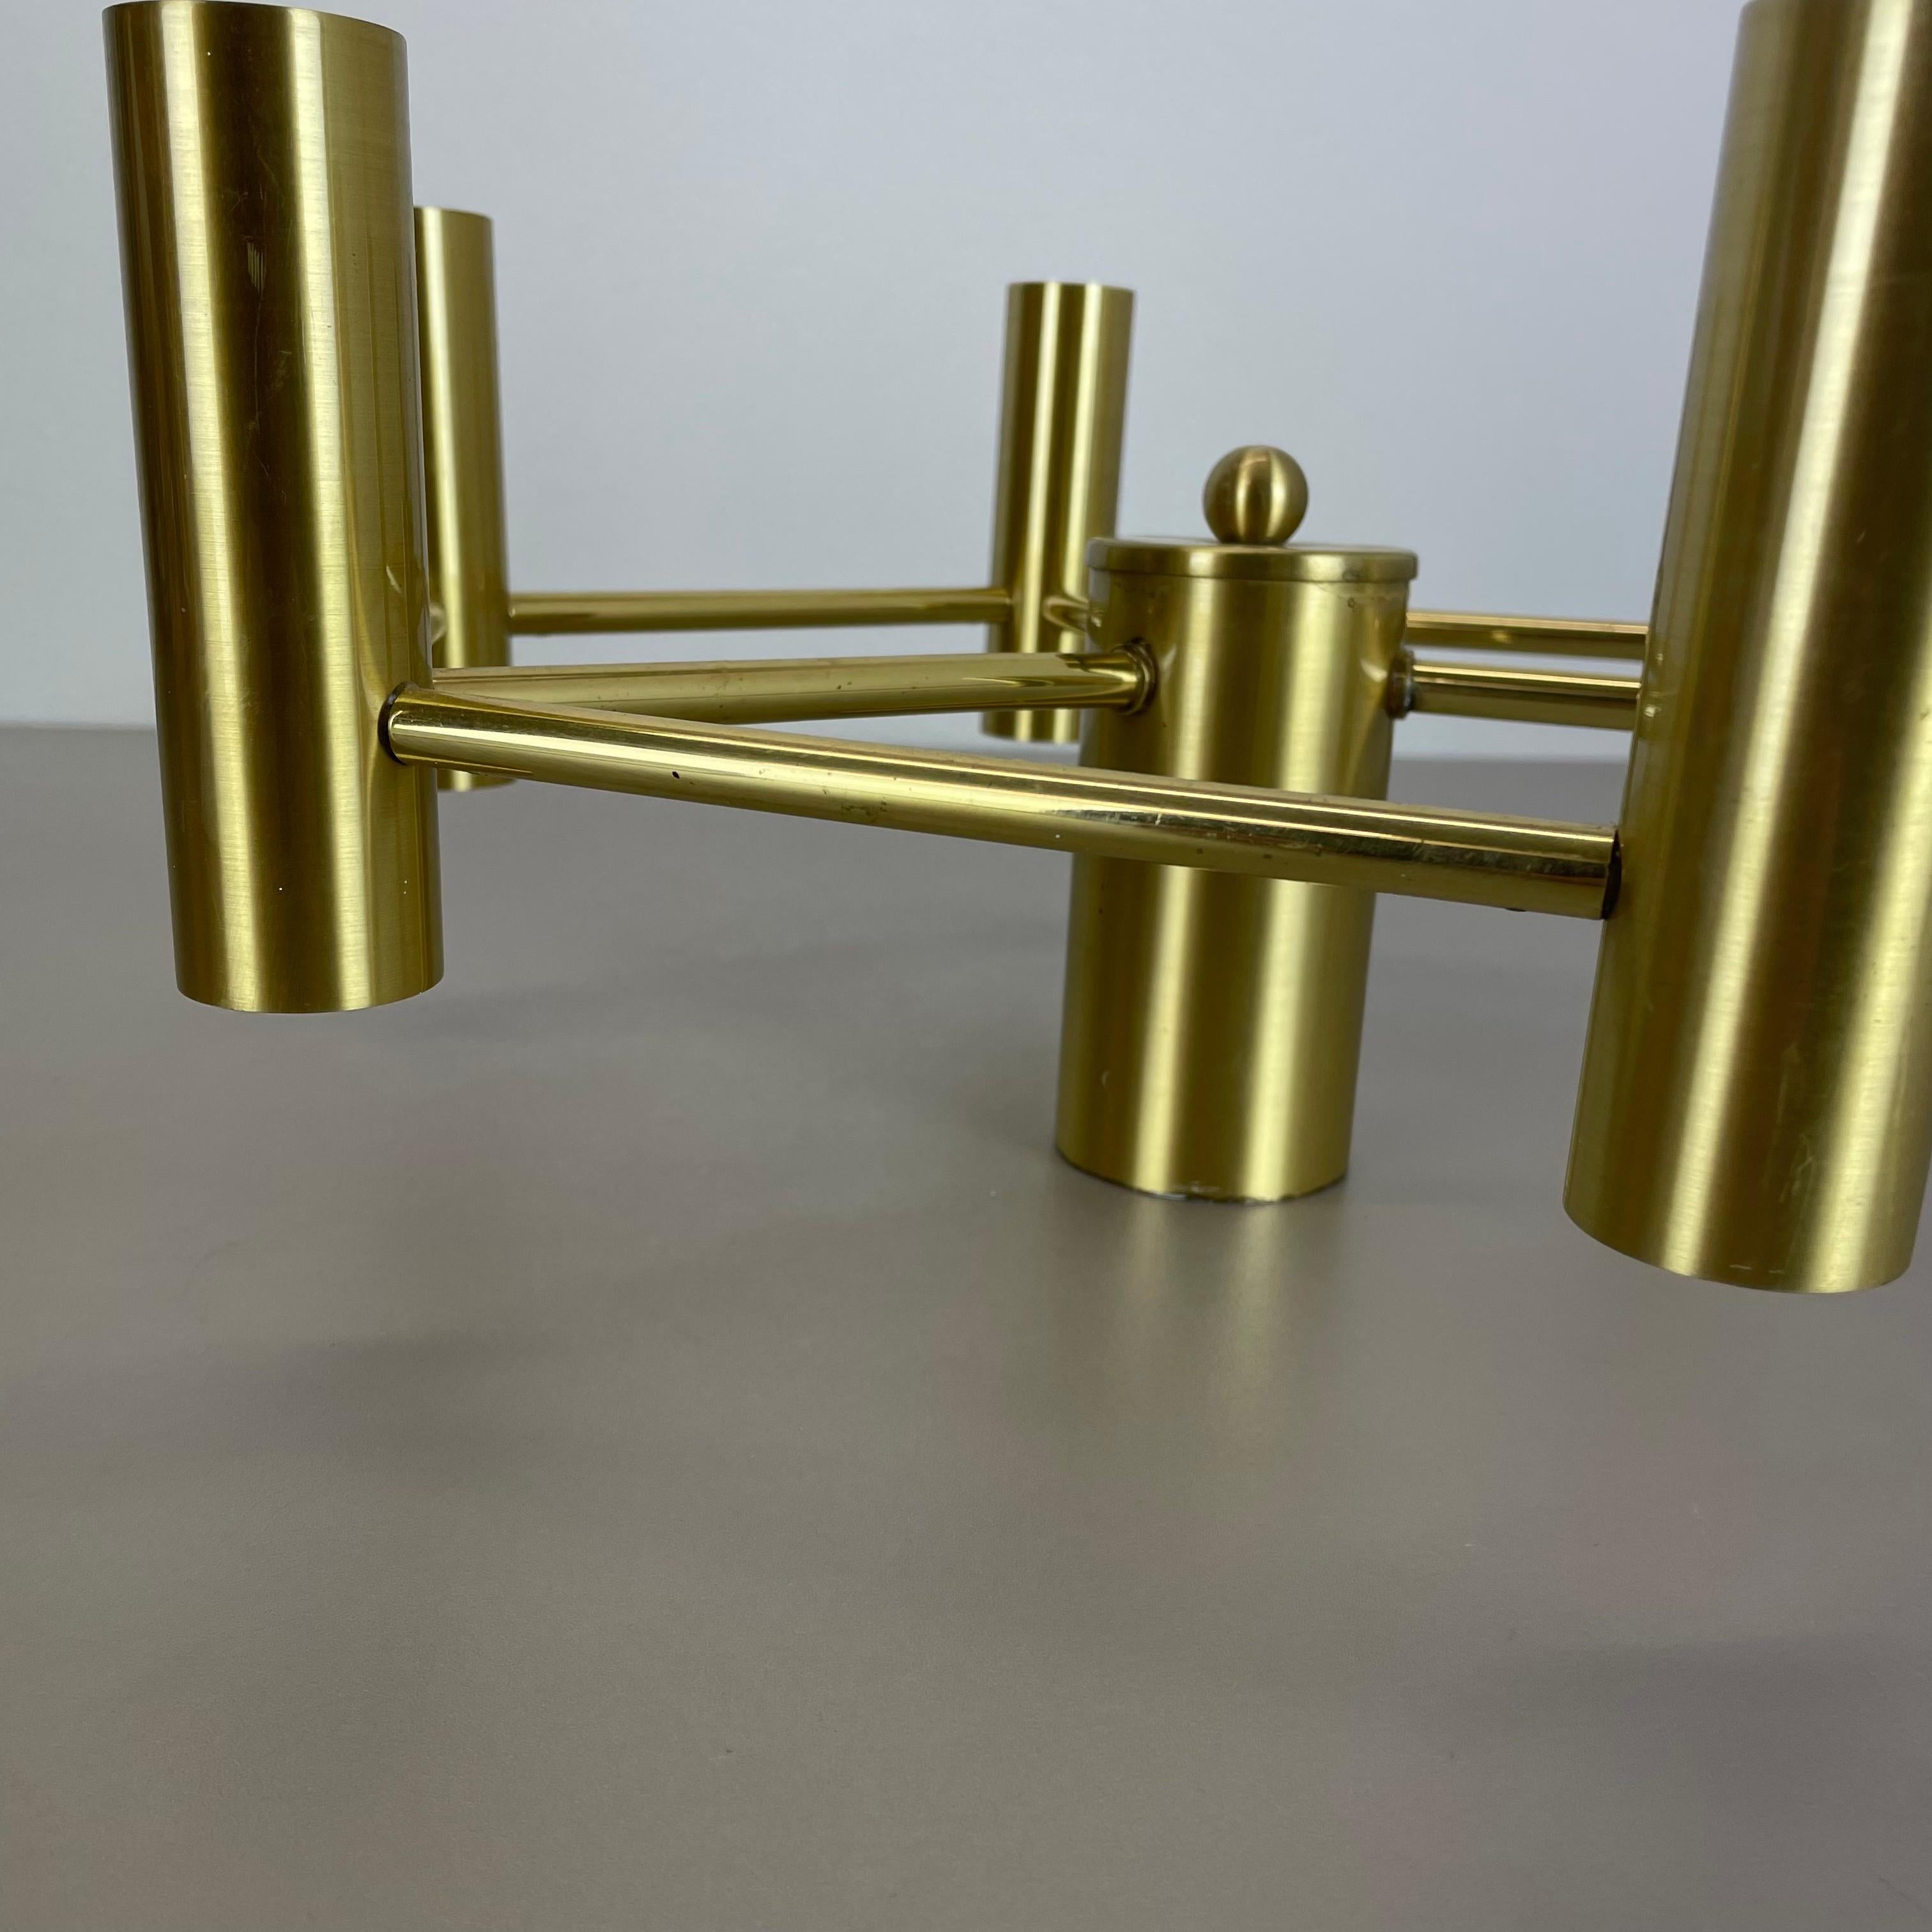 Brass Italian Stilnovo Style Atomic Space Age Ceiling Light Sconces, Italy, 1970 For Sale 6